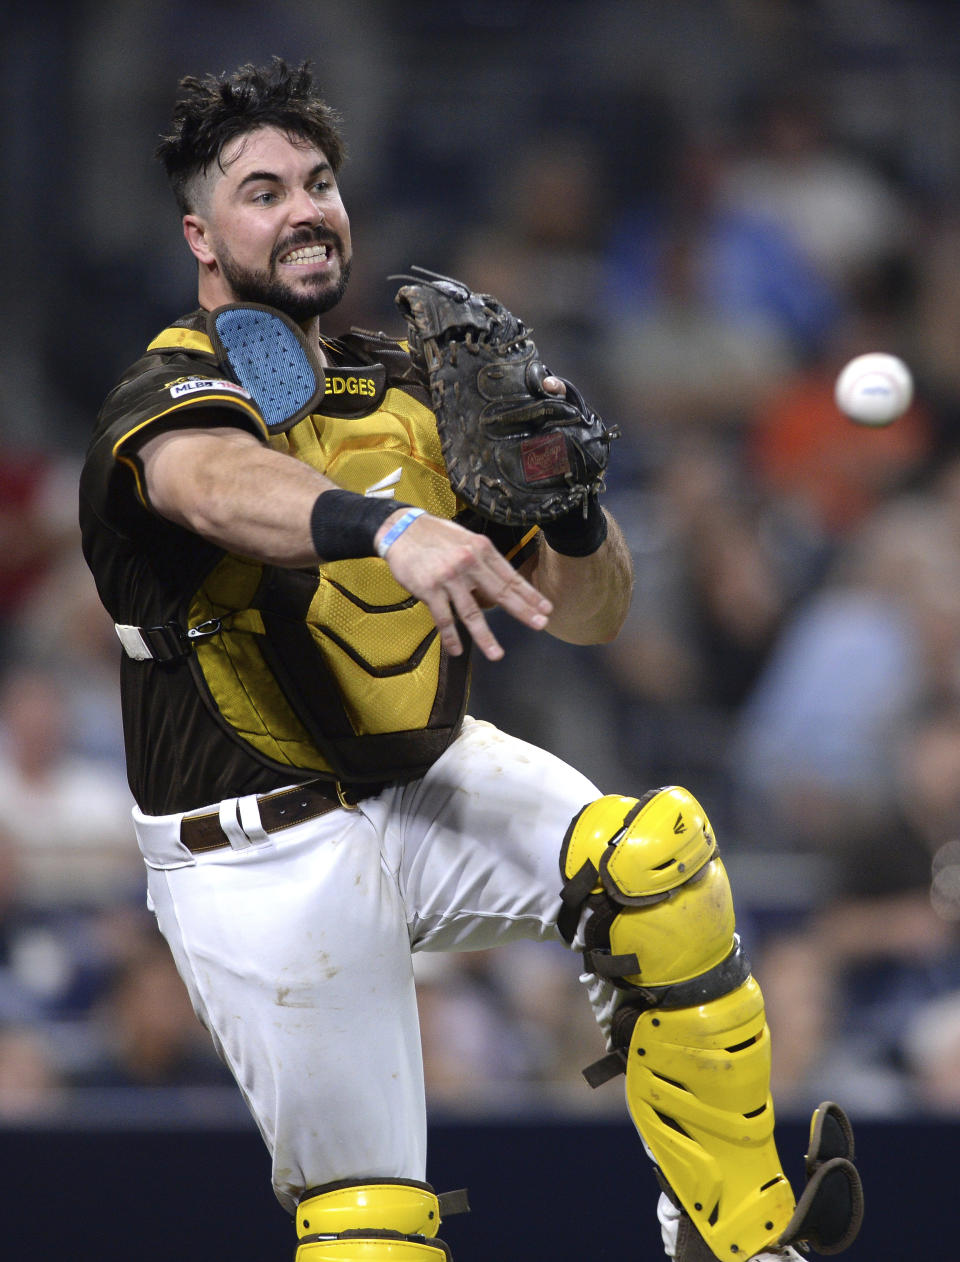 San Diego Padres catcher Austin Hedges throws to first base late on a wild pitch swinging strike-out by San Francisco Giants' Austin Slater during the sixth inning of a baseball game Friday, July 26, 2019, in San Diego. (AP Photo/Orlando Ramirez)